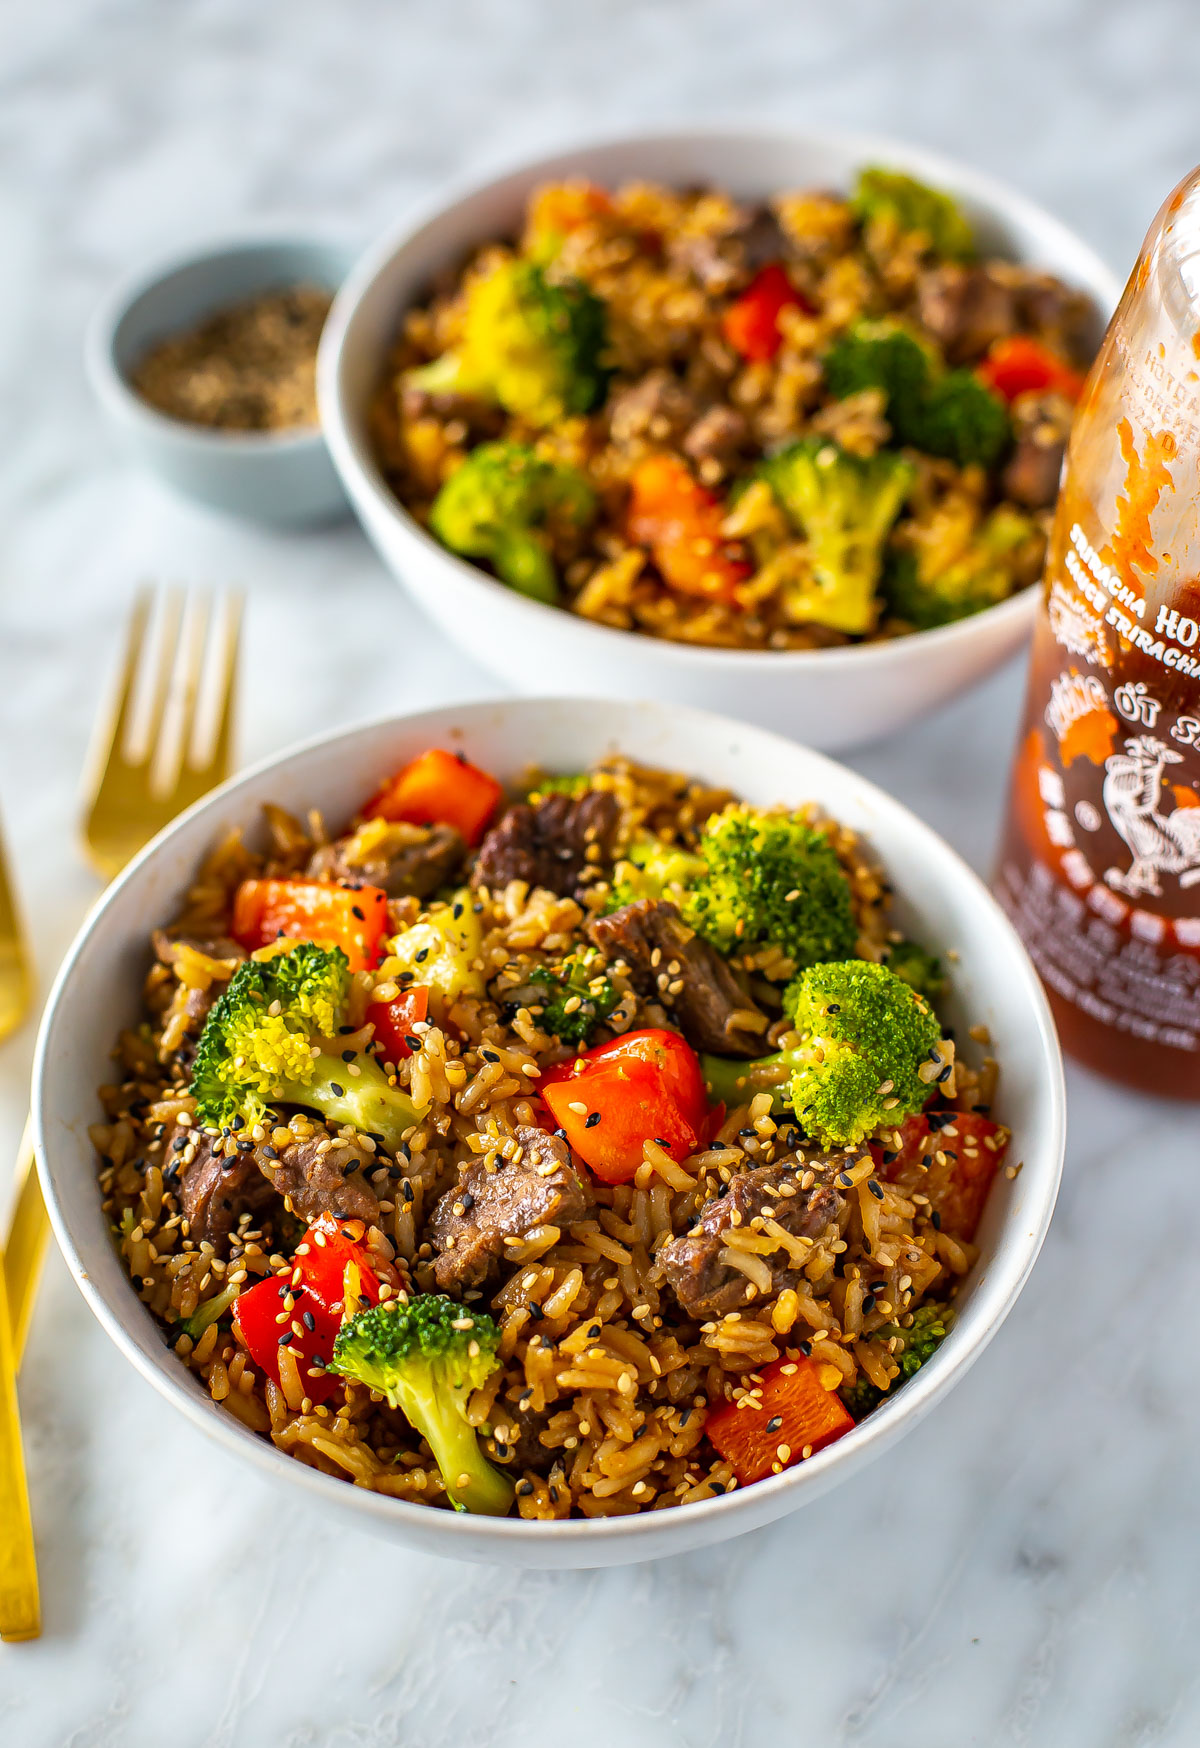 Two bowls of Instant Pot beef and broccoli, one in the foreground and one in the background.